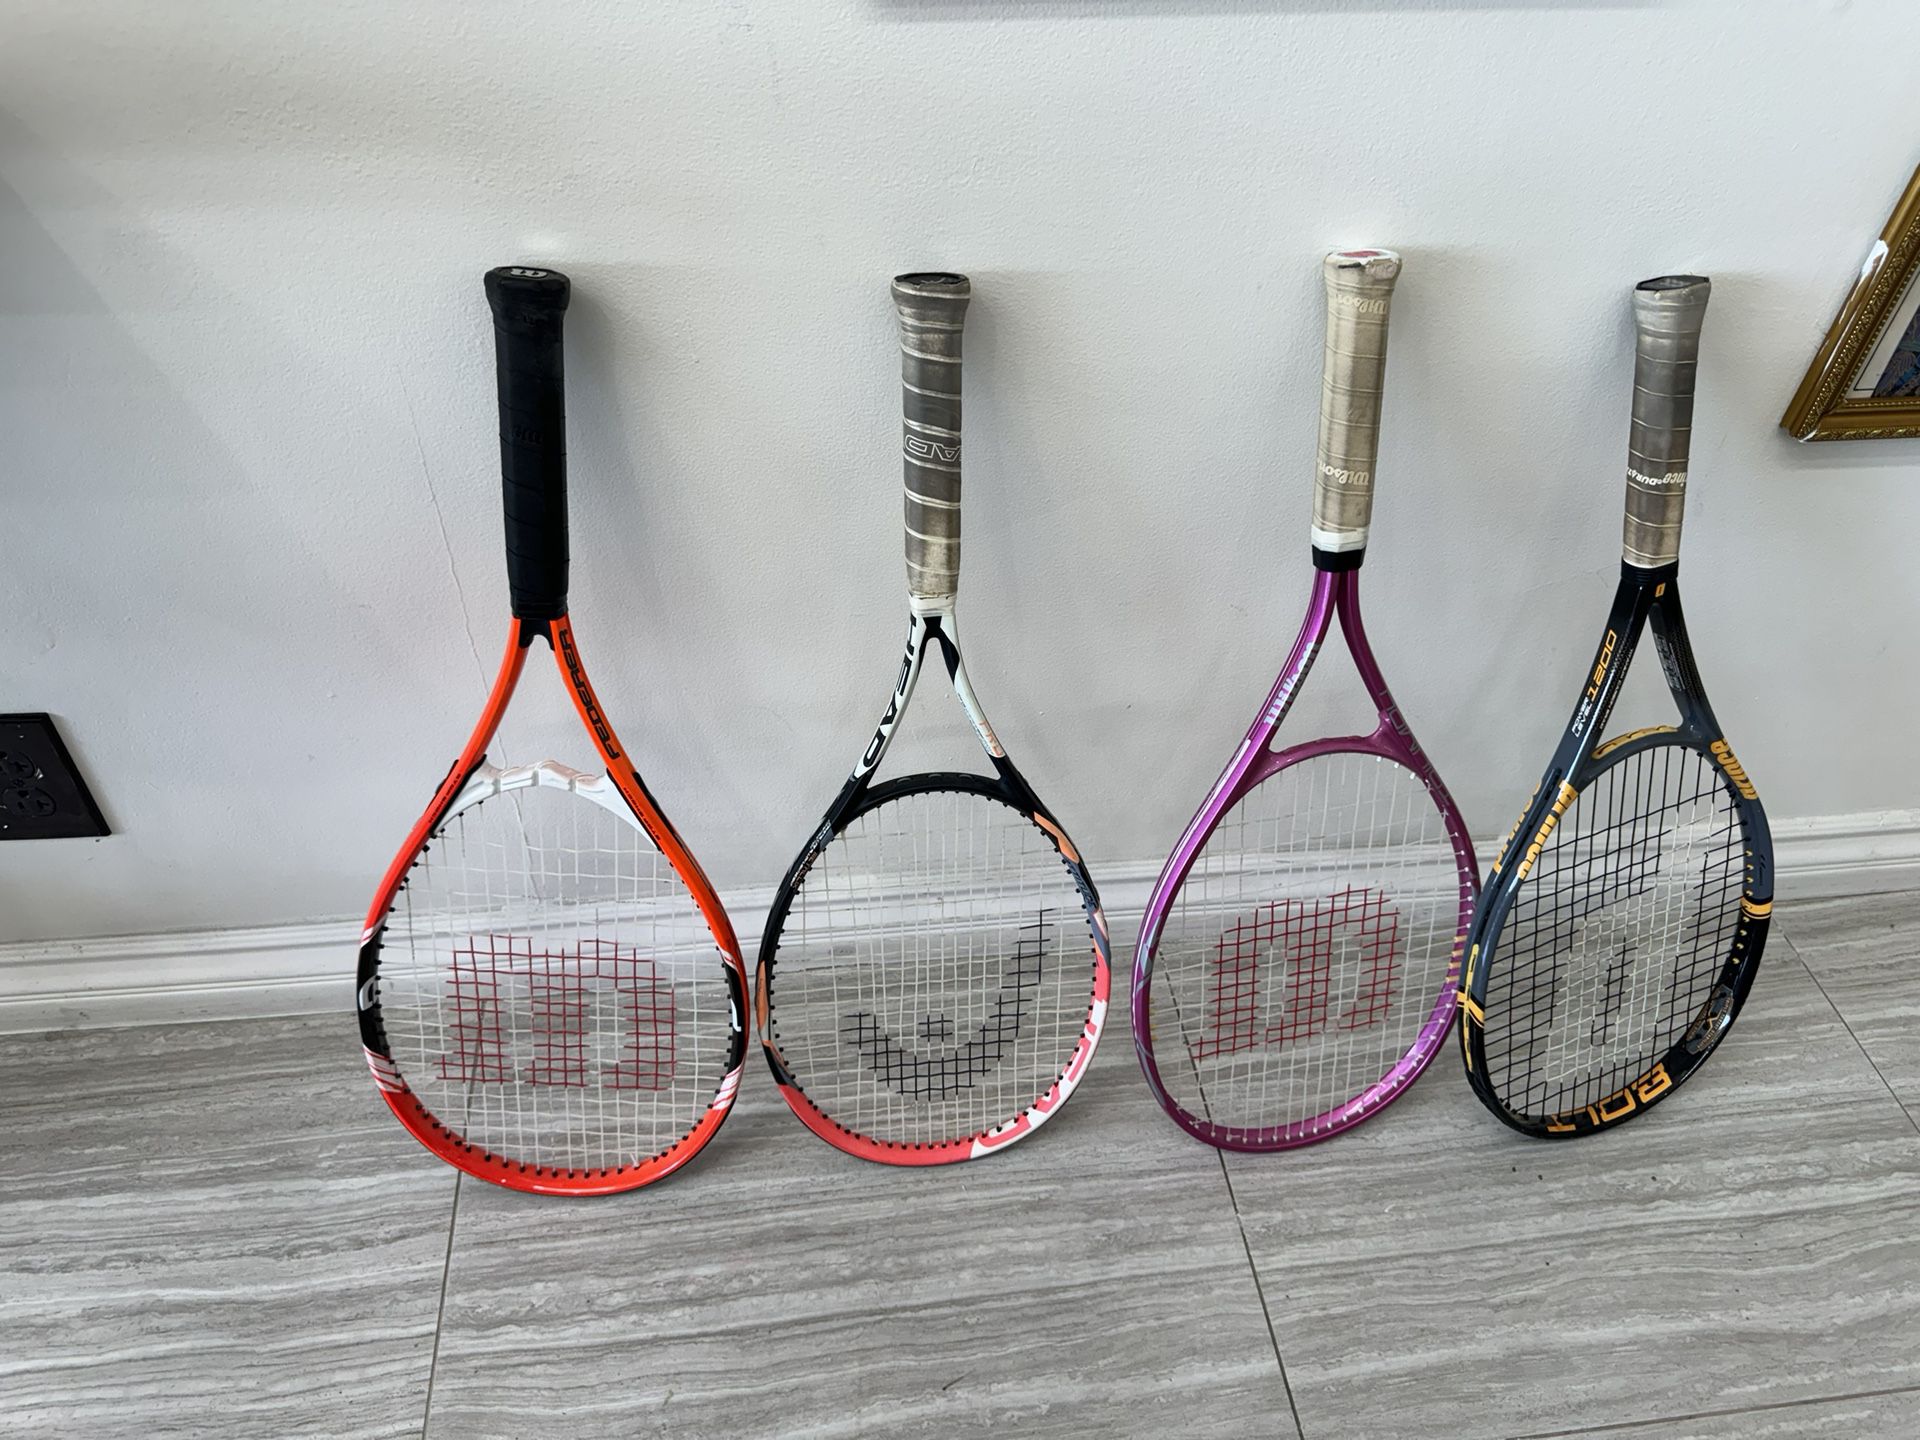 4x Tennis Rackets For One Price